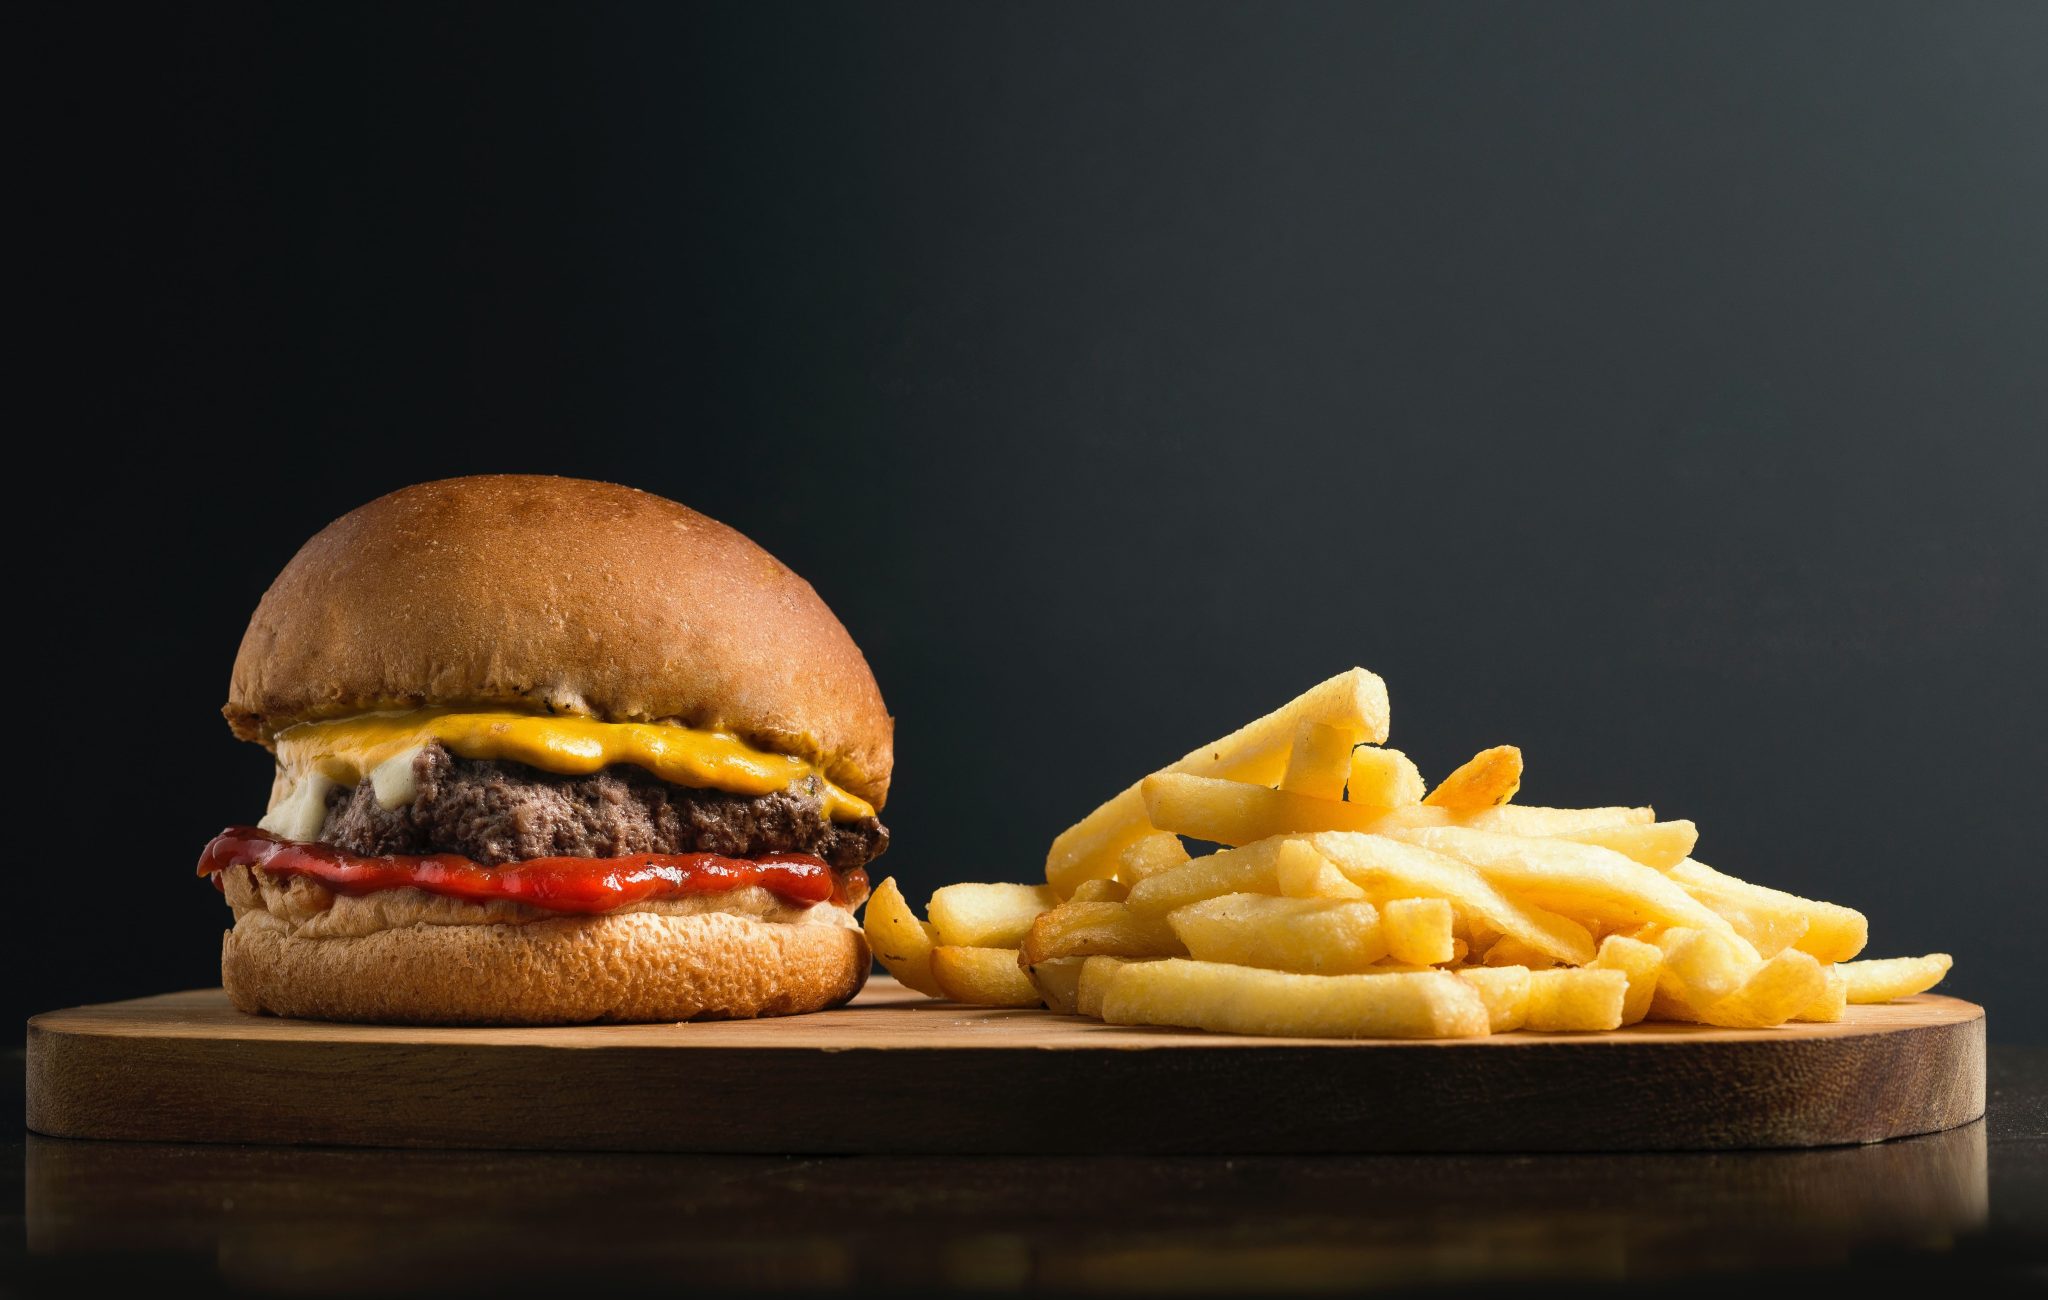 Picture of a cheeseburger and fries against a black background.